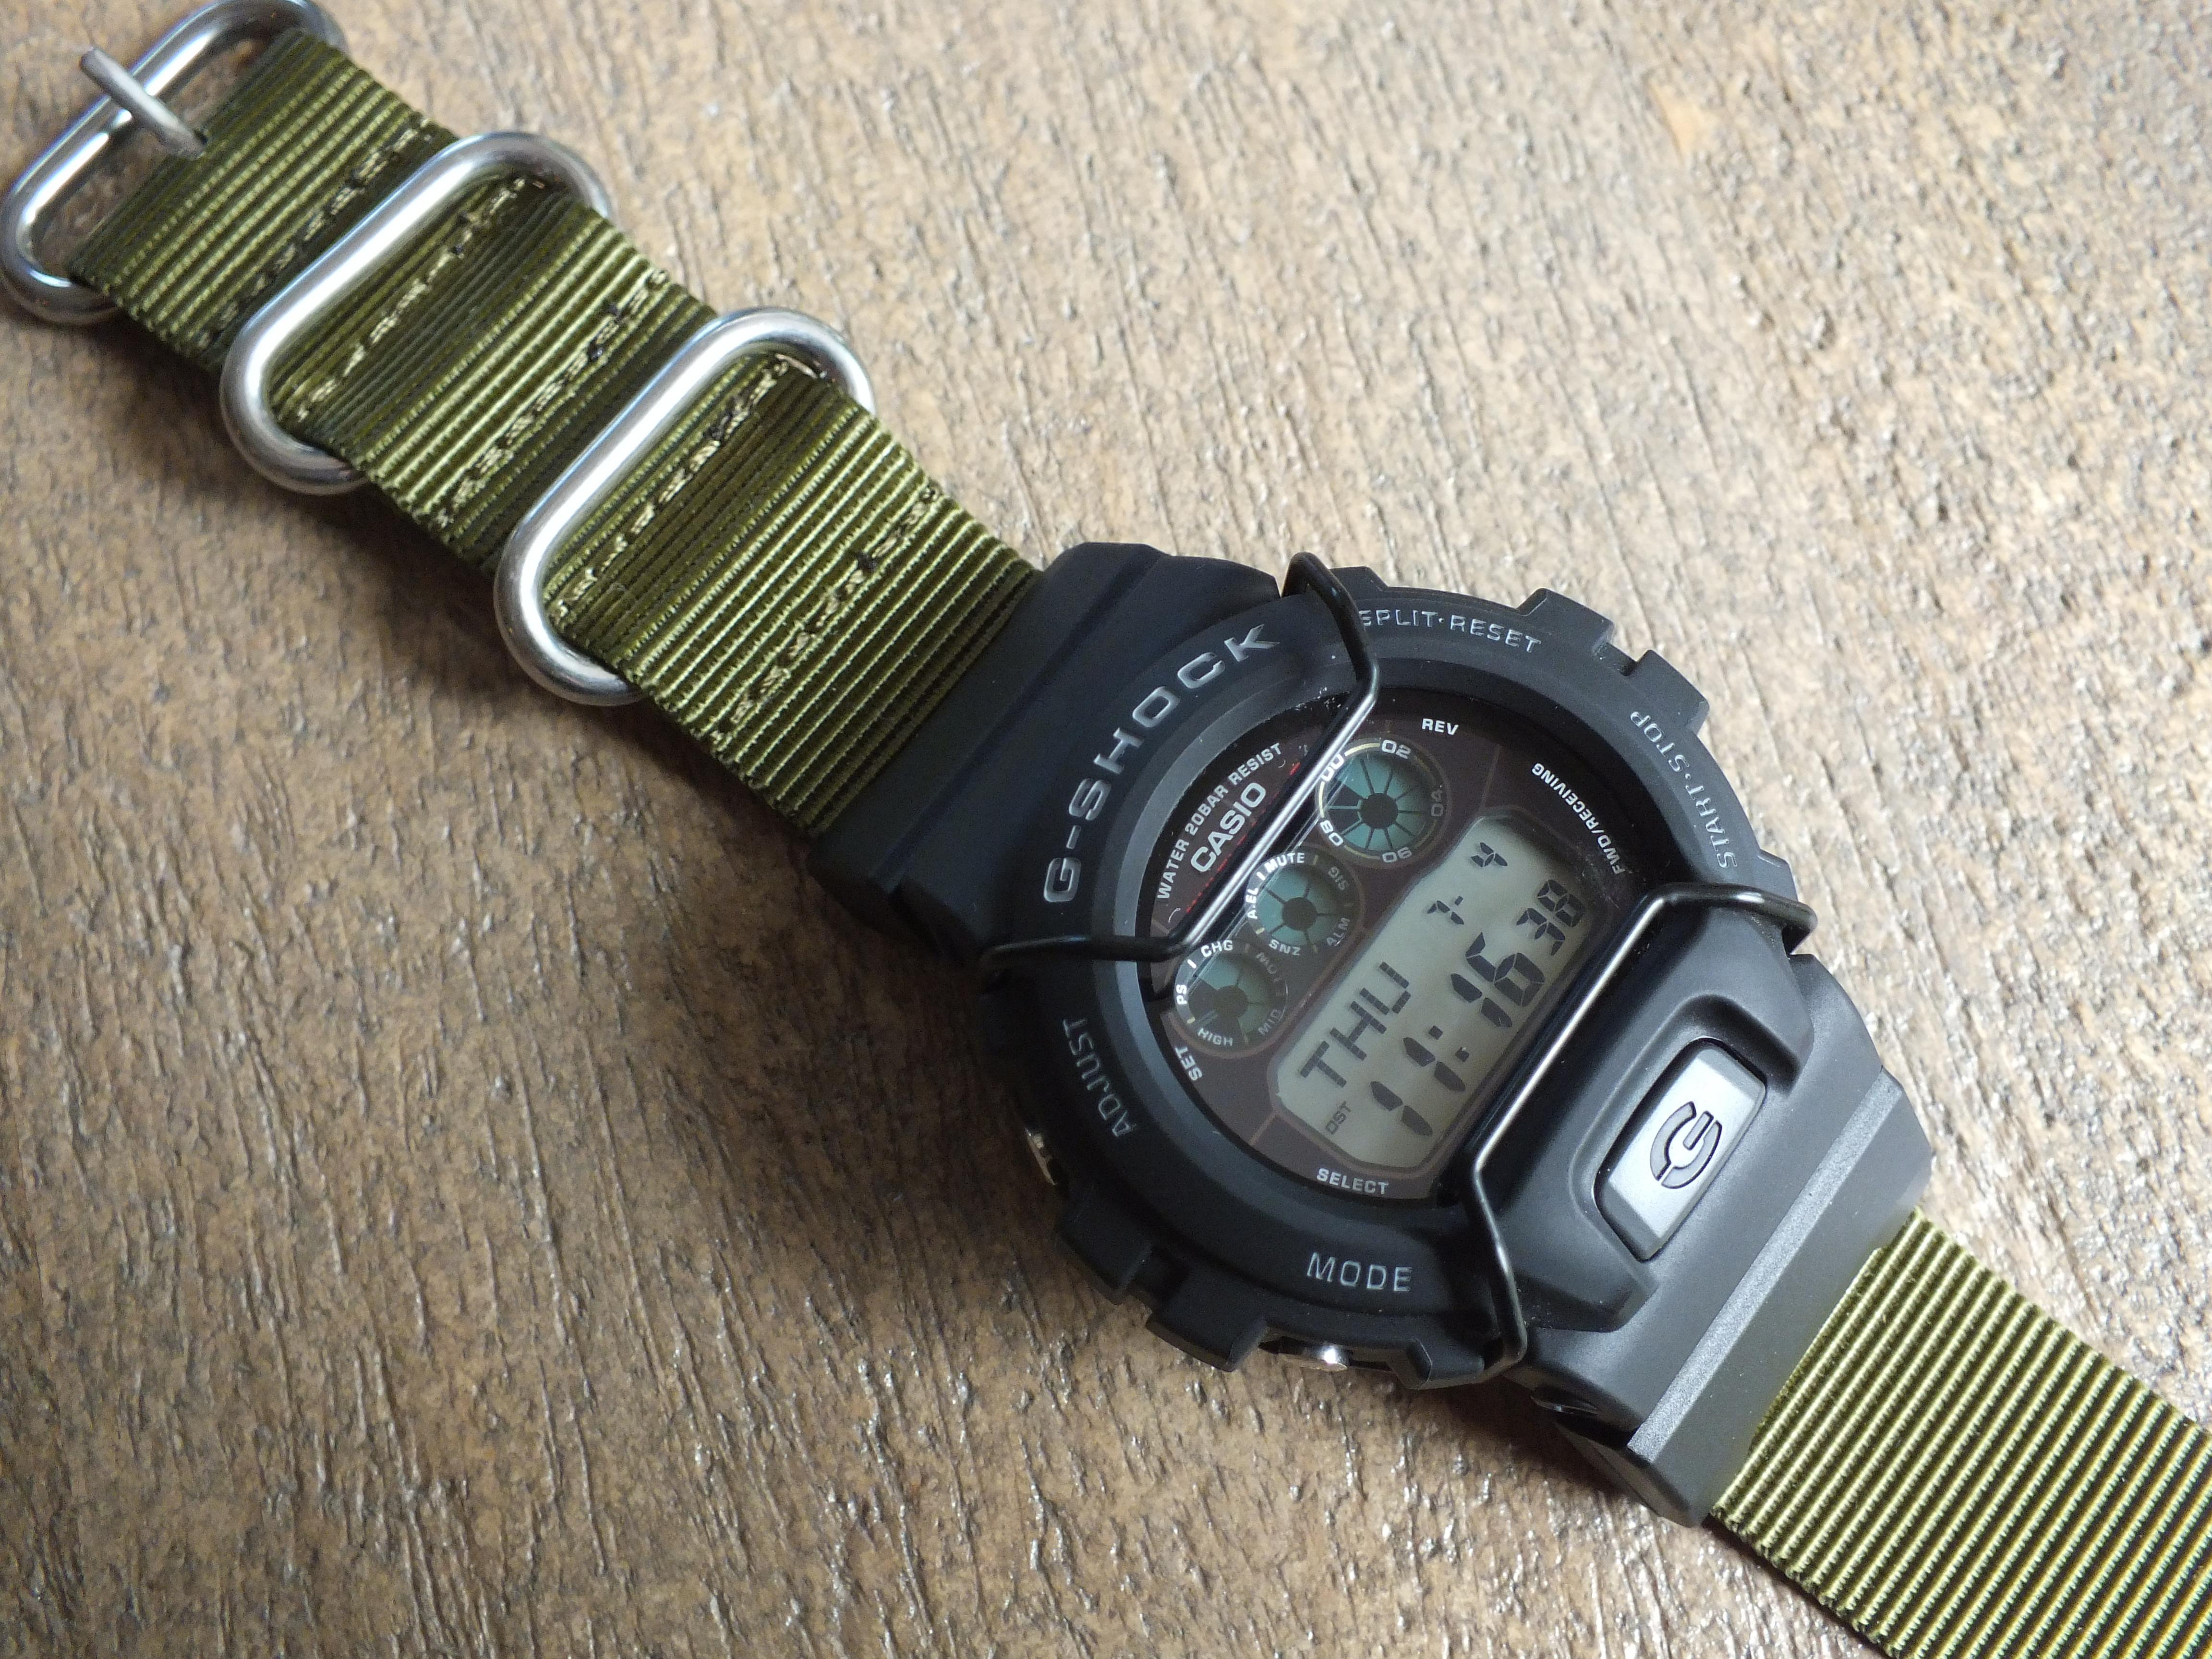 Casio G-Shock GW6900-1 with Strap Adapters and Bullbars